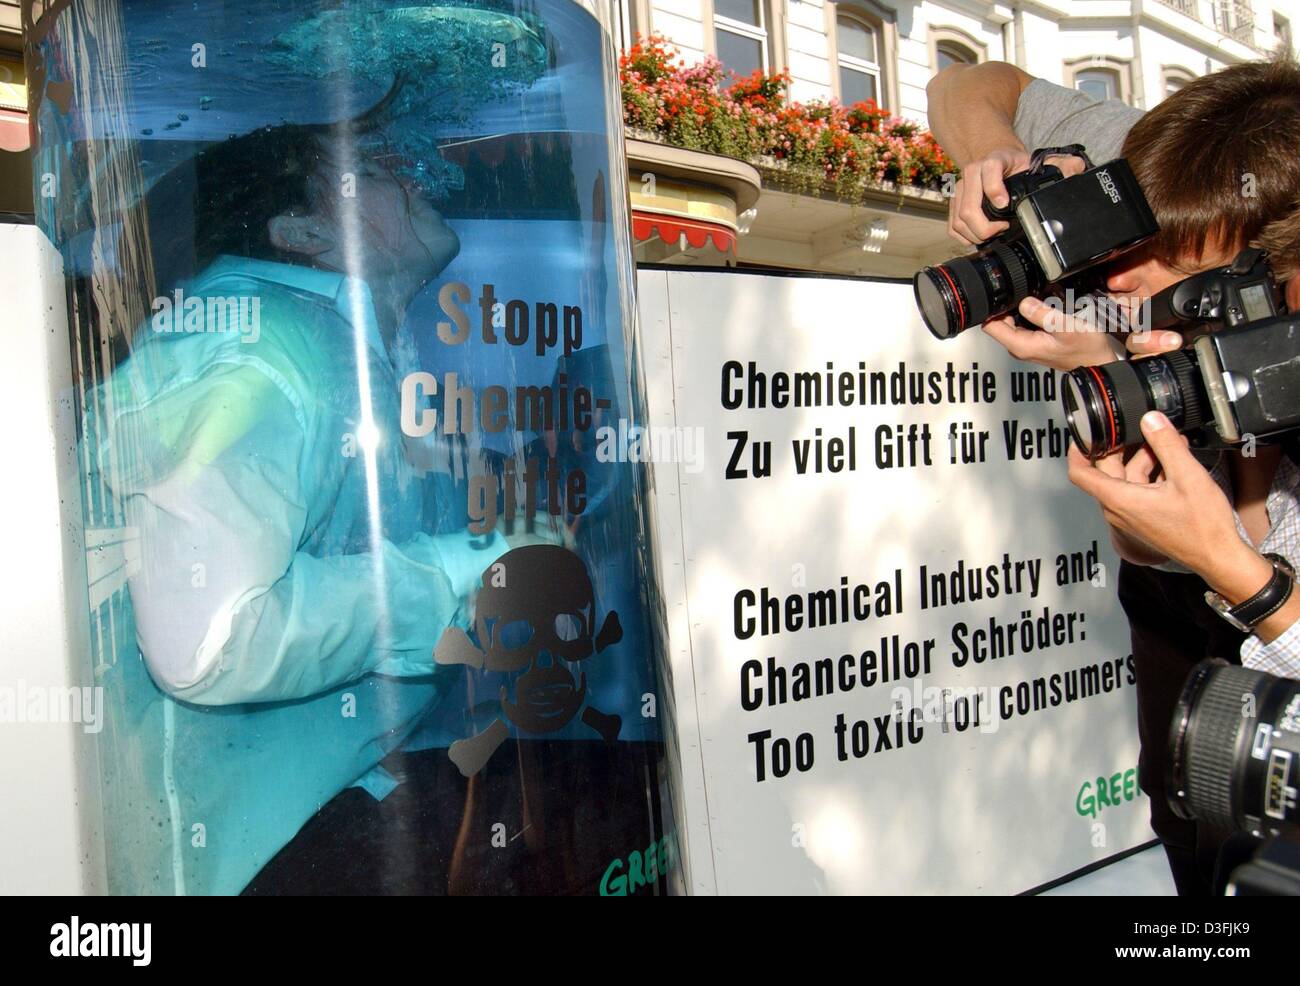 (dpa) - A Greenpeace activist sits in a tank filled with bluish water to protest against the lack of protection against chemical poisons outside the venue of the annual meeting of the European Chemical Industry Council (CEFIC) in Hamburg, 27 June 2003. The writing on the tank reads 'Stopp Chemiegifte' (stop chemical poisons). Stock Photo